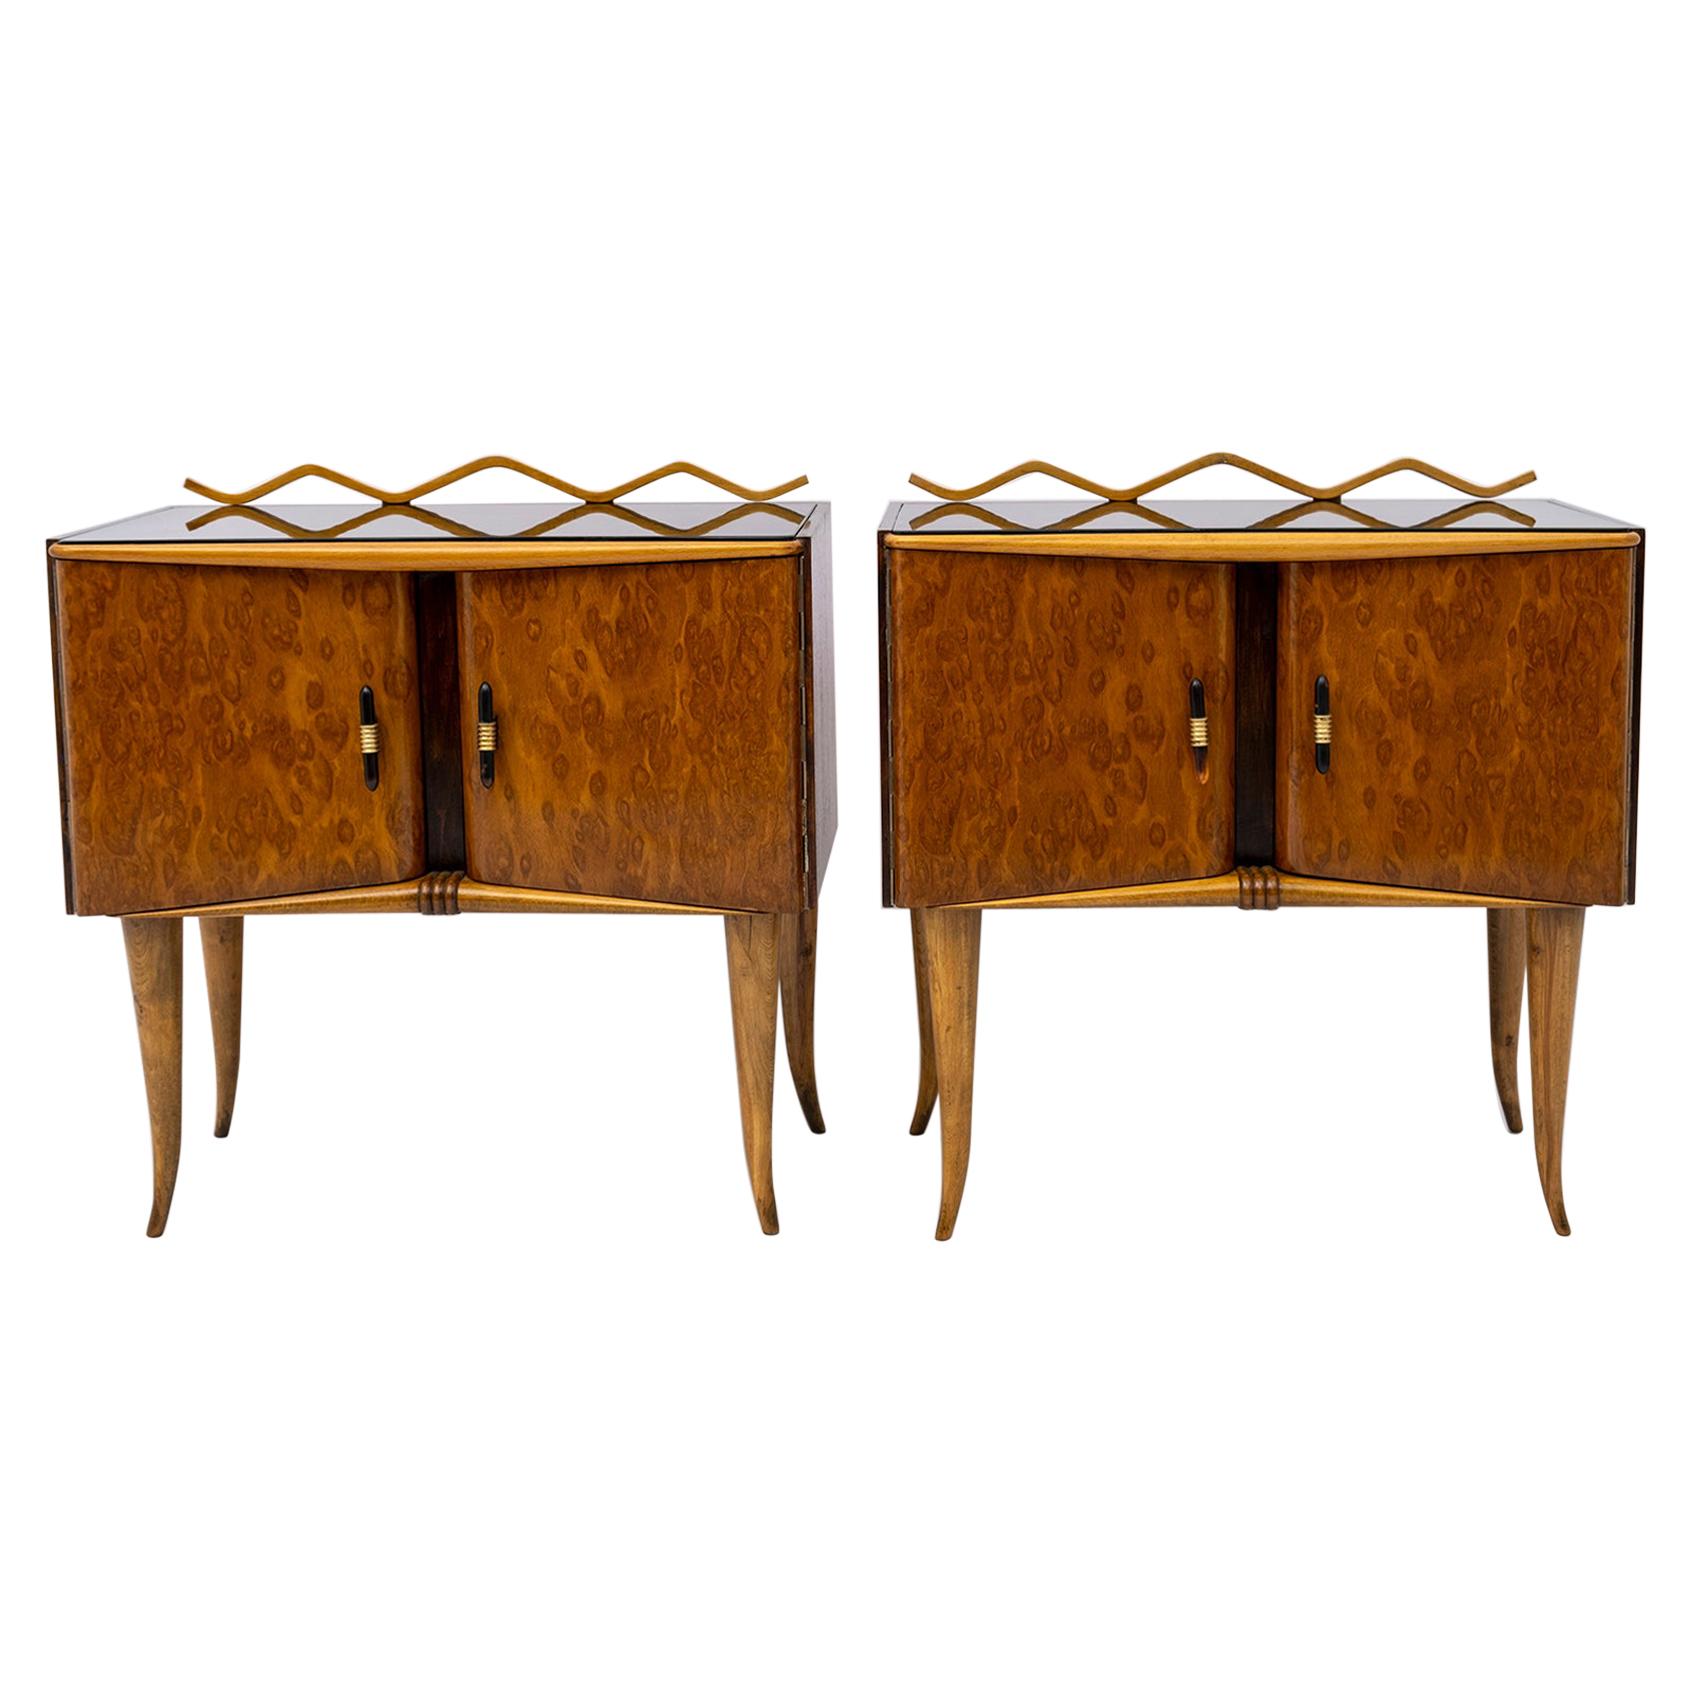 Pair of Art Deco Italian Ash Briar and Walnut Bedside Tables, 1920s